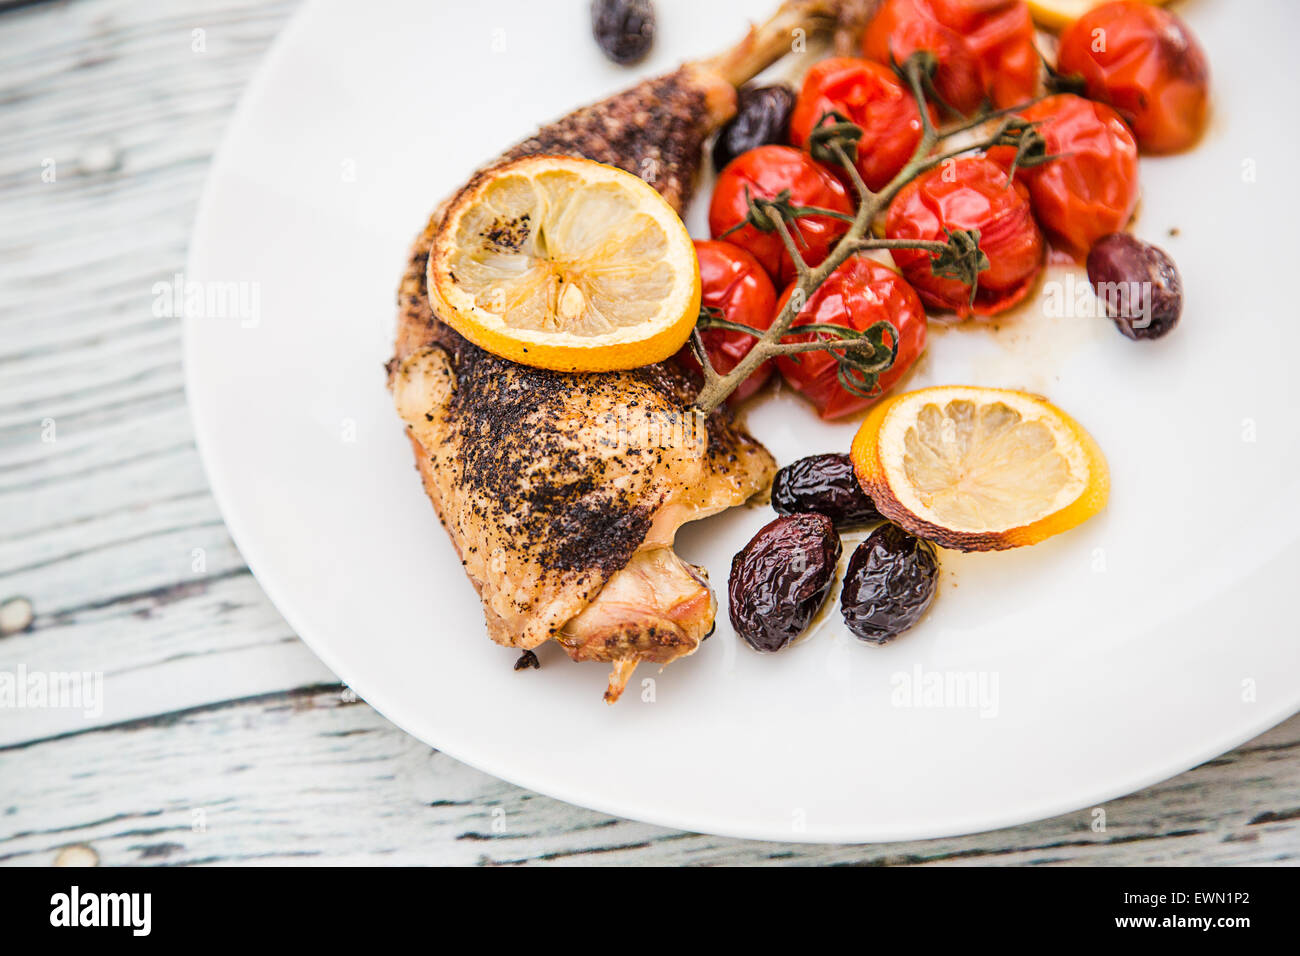 Oven Baked Sumac Chicken with Cherry Tomatoes and Kalamata Olives, Stock Photo